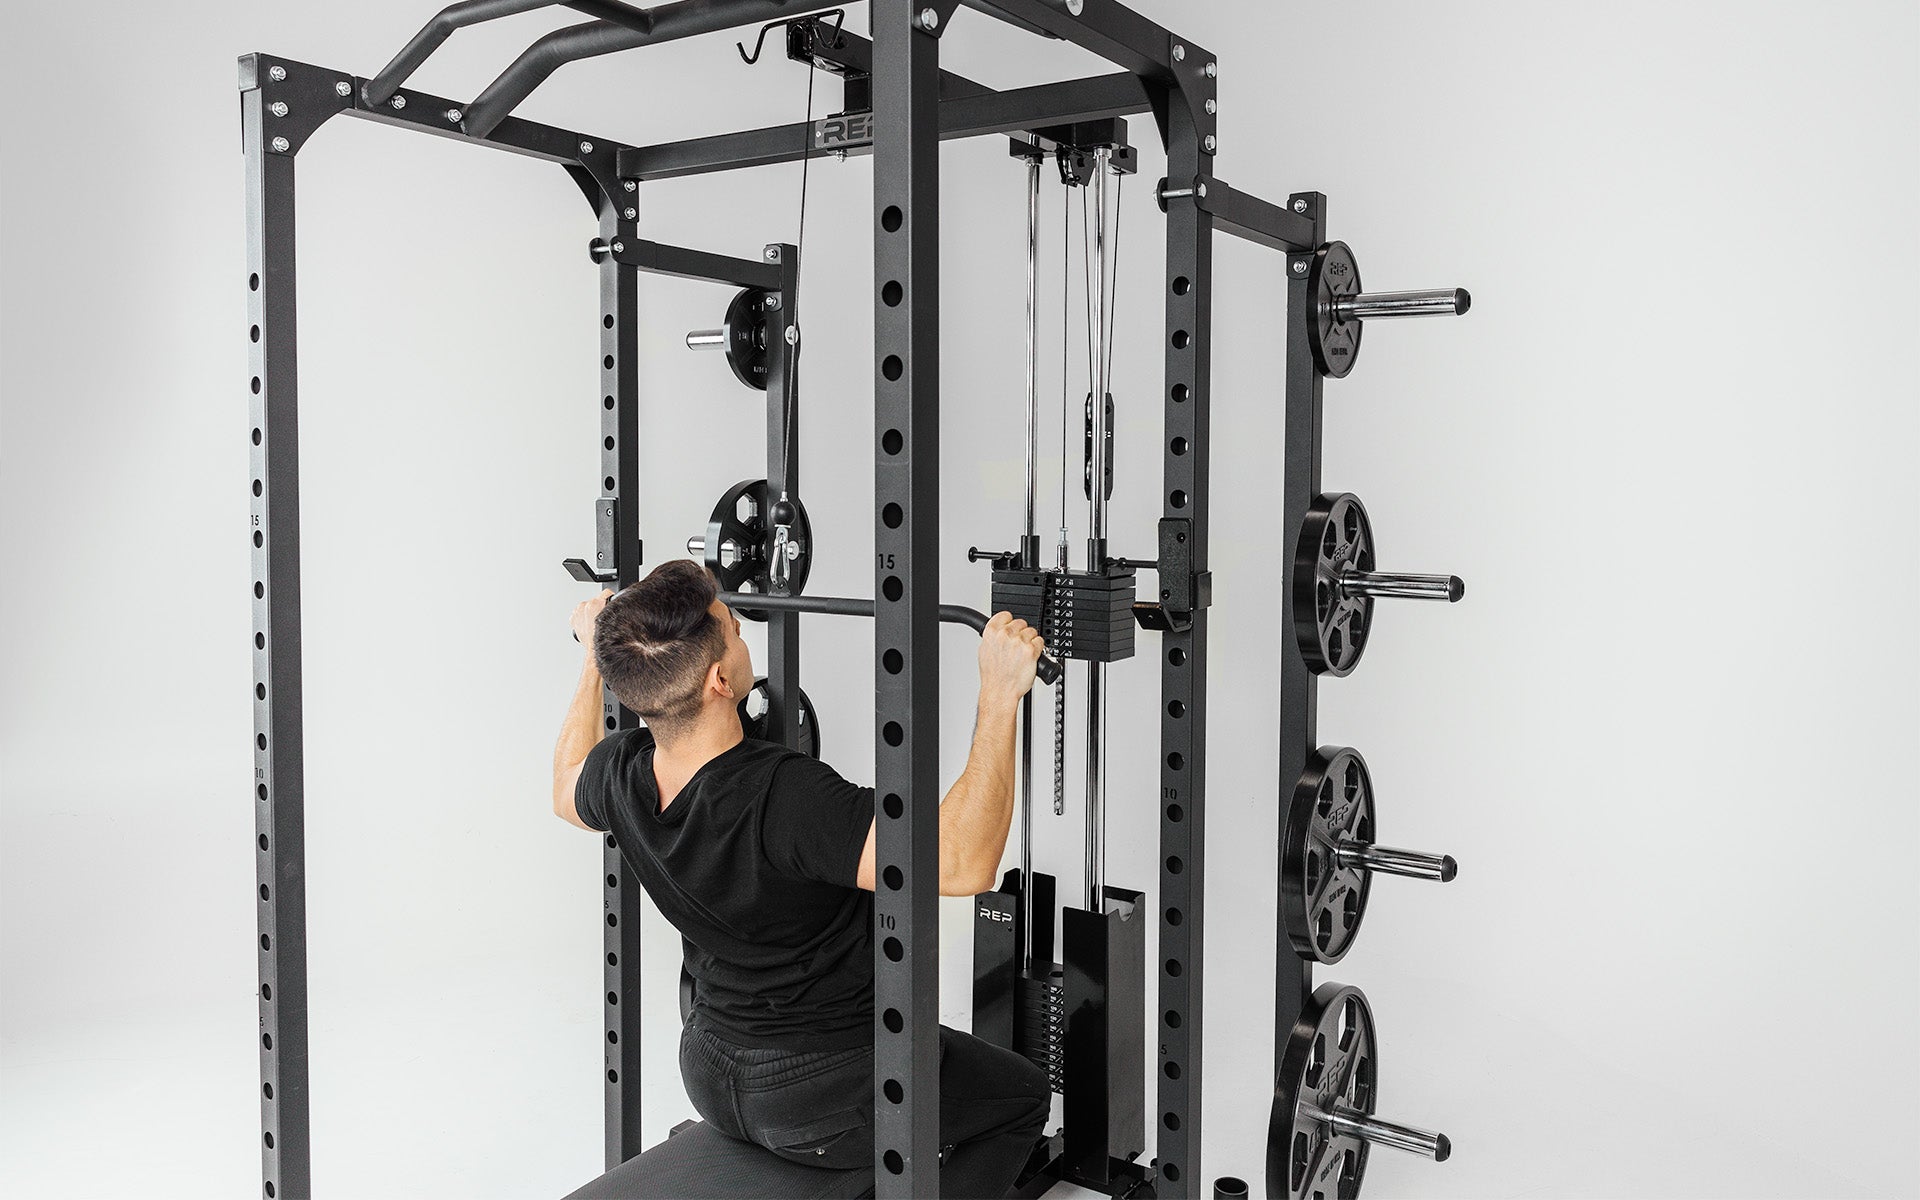 Selectorized Lat Pulldown and Low Row (1000 Series) Being Used For Lat Pulldowns